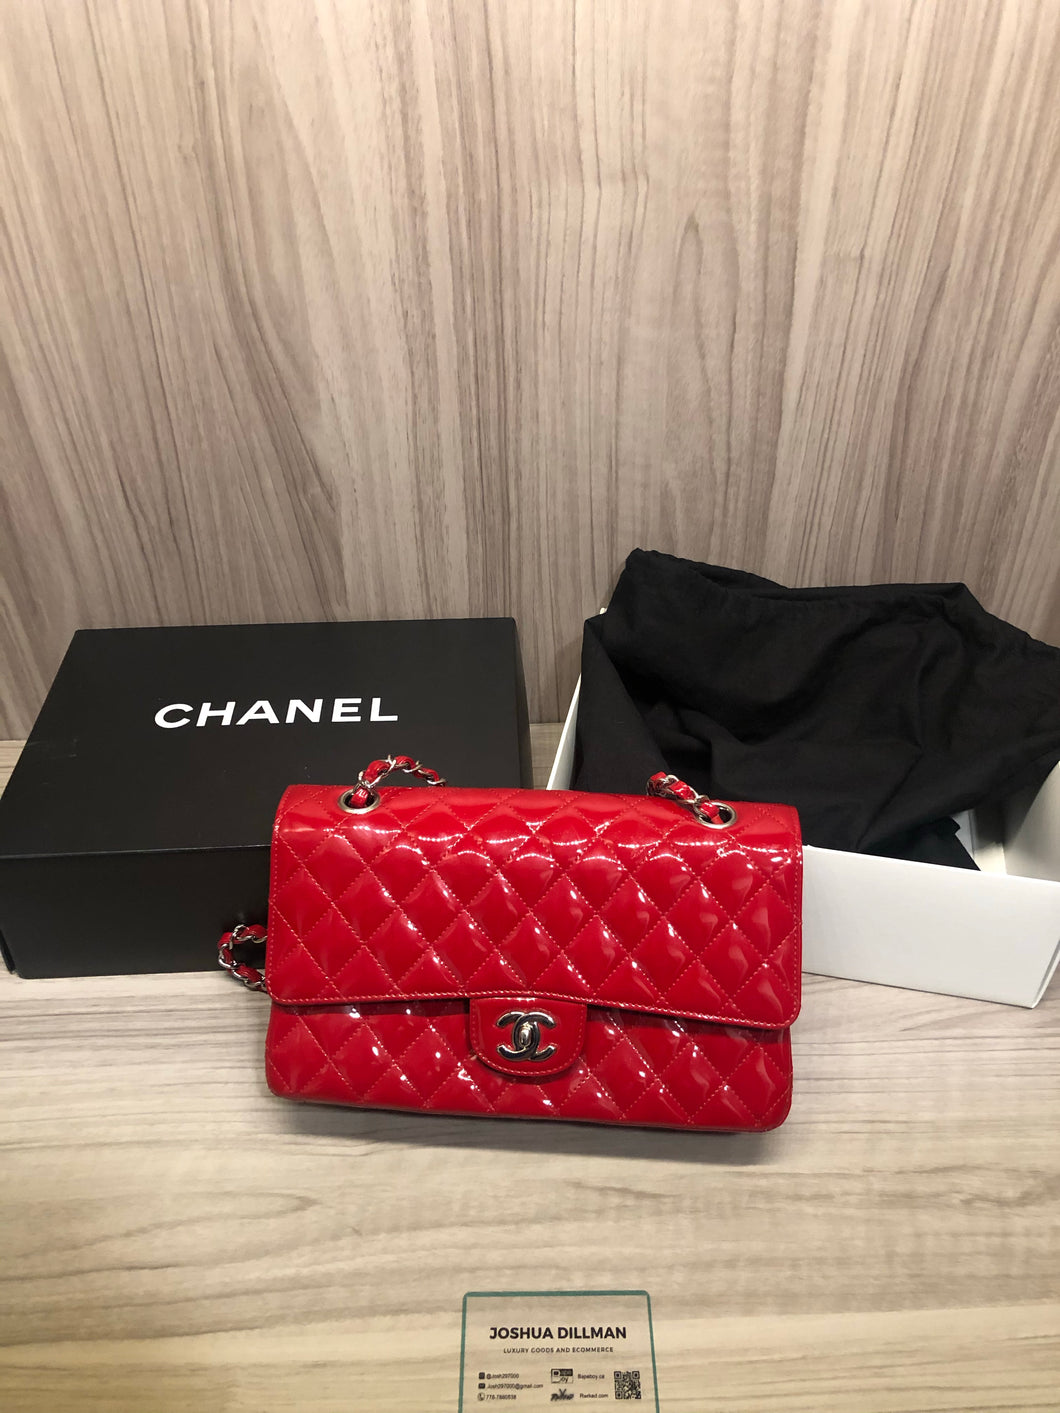 Chanel patant leather medium classic double flap bag